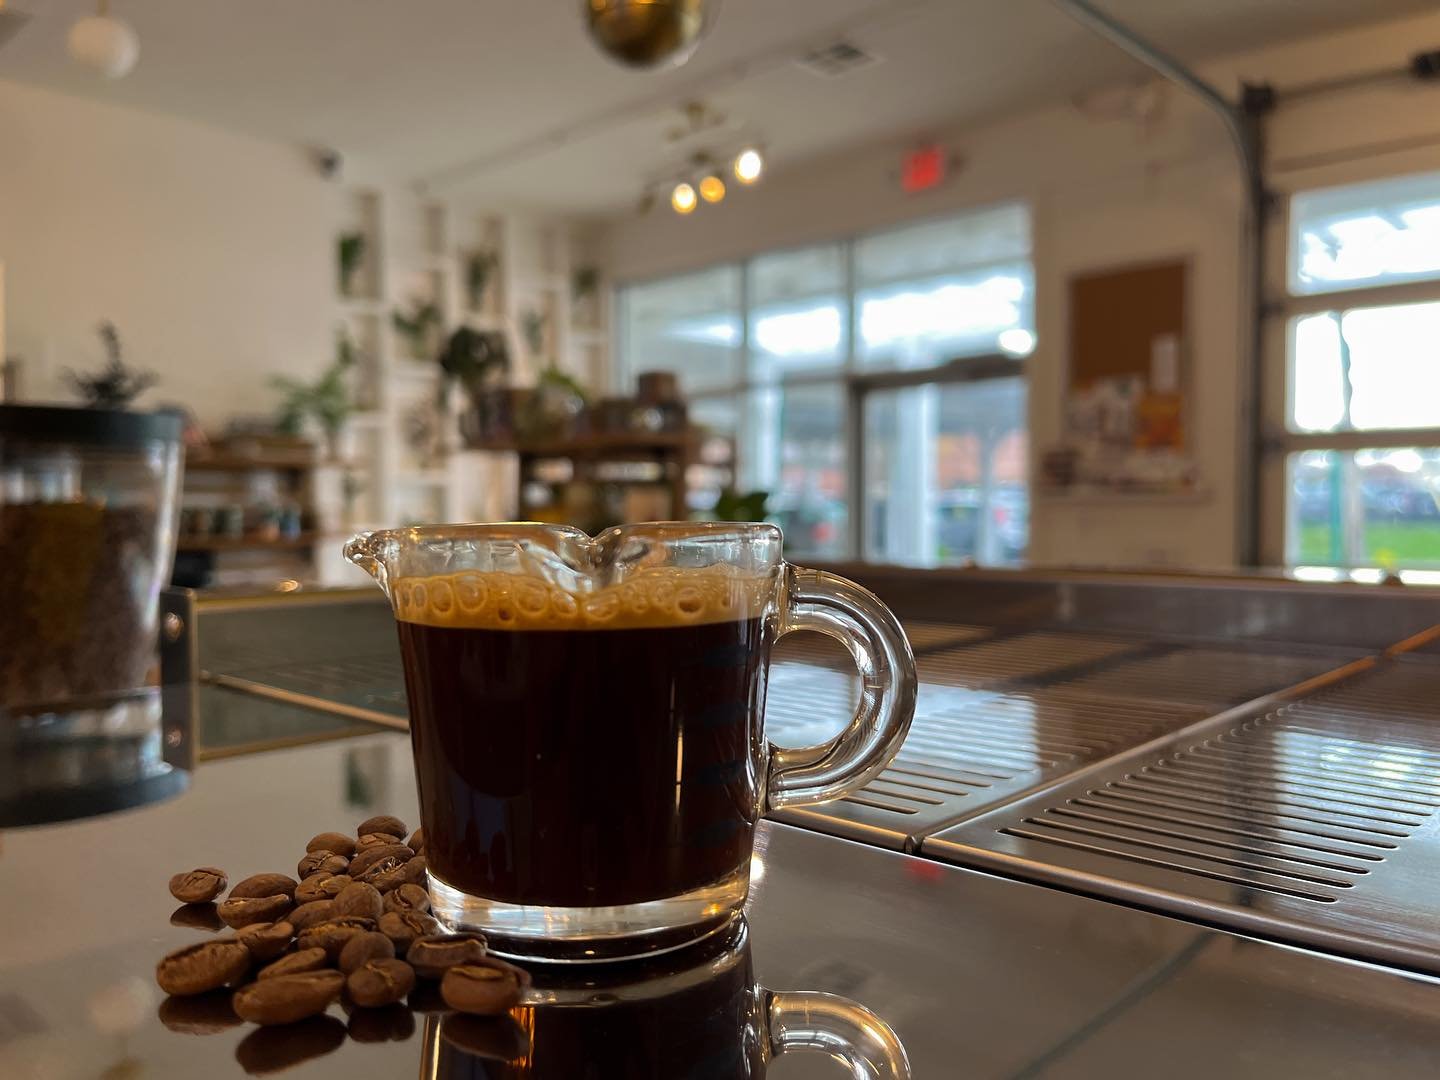 Our espresso makes any drink delicious! ☀️

#coffee #espresso #cafe #juicery #plantbased #coffeepittsburgh